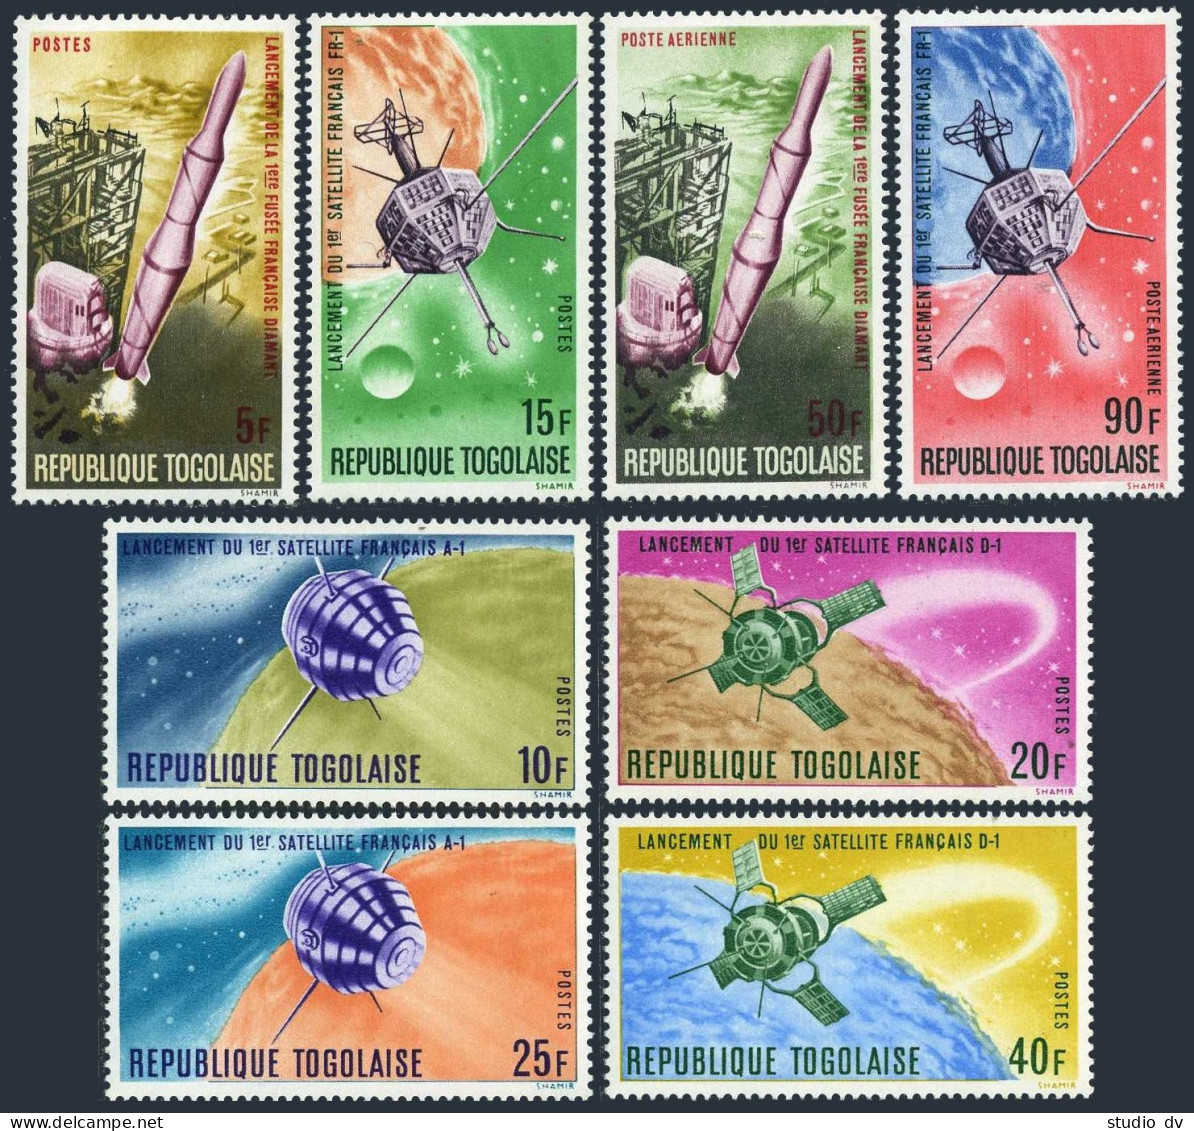 Togo 593-598,C65-C66,MNH.Michel 559-566. French Achievements In Space,1967. - Togo (1960-...)